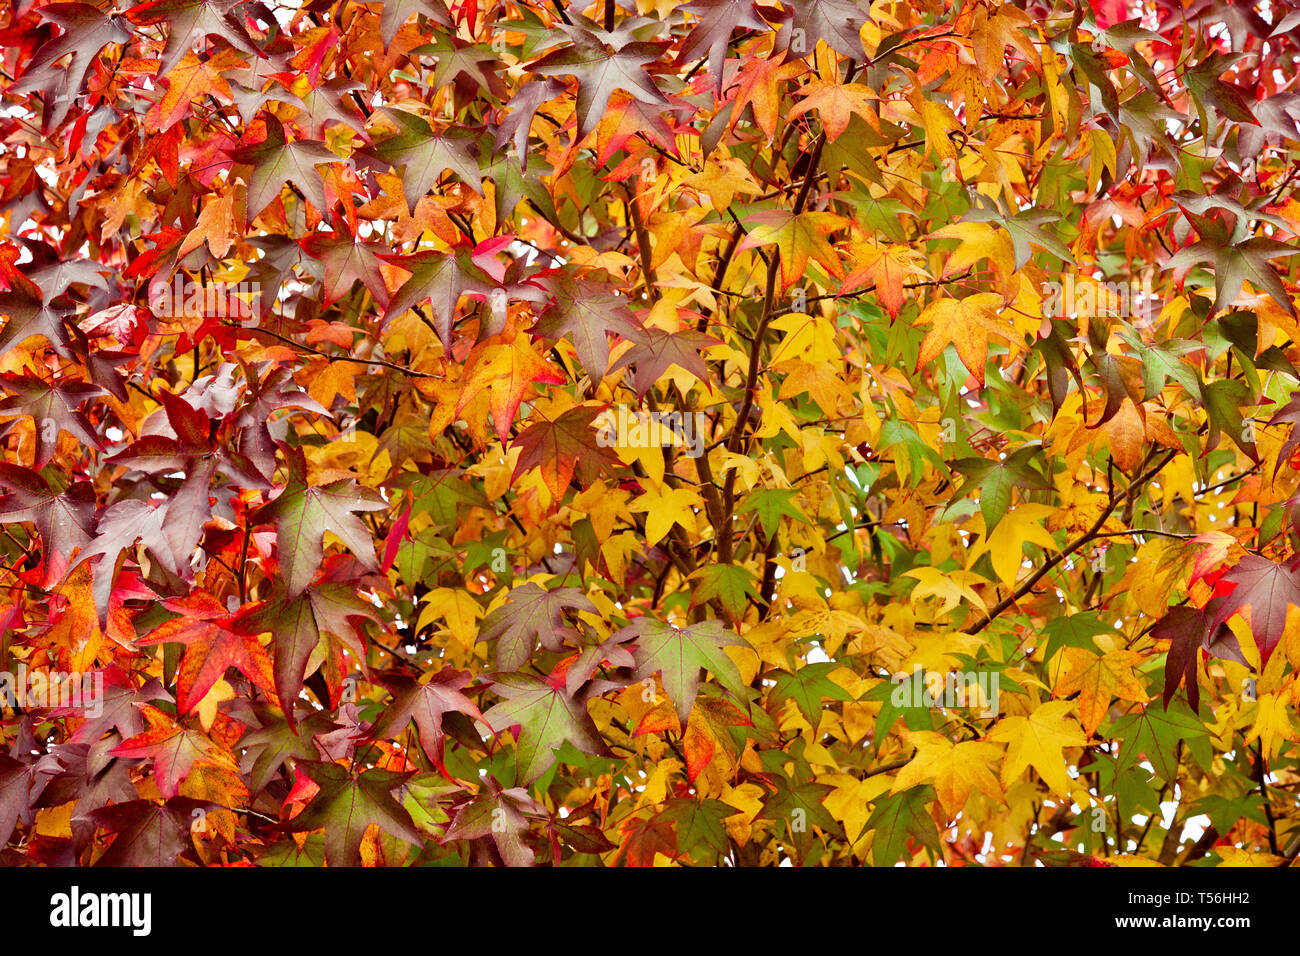 Nature background with bright autumn leaves Stock Photo